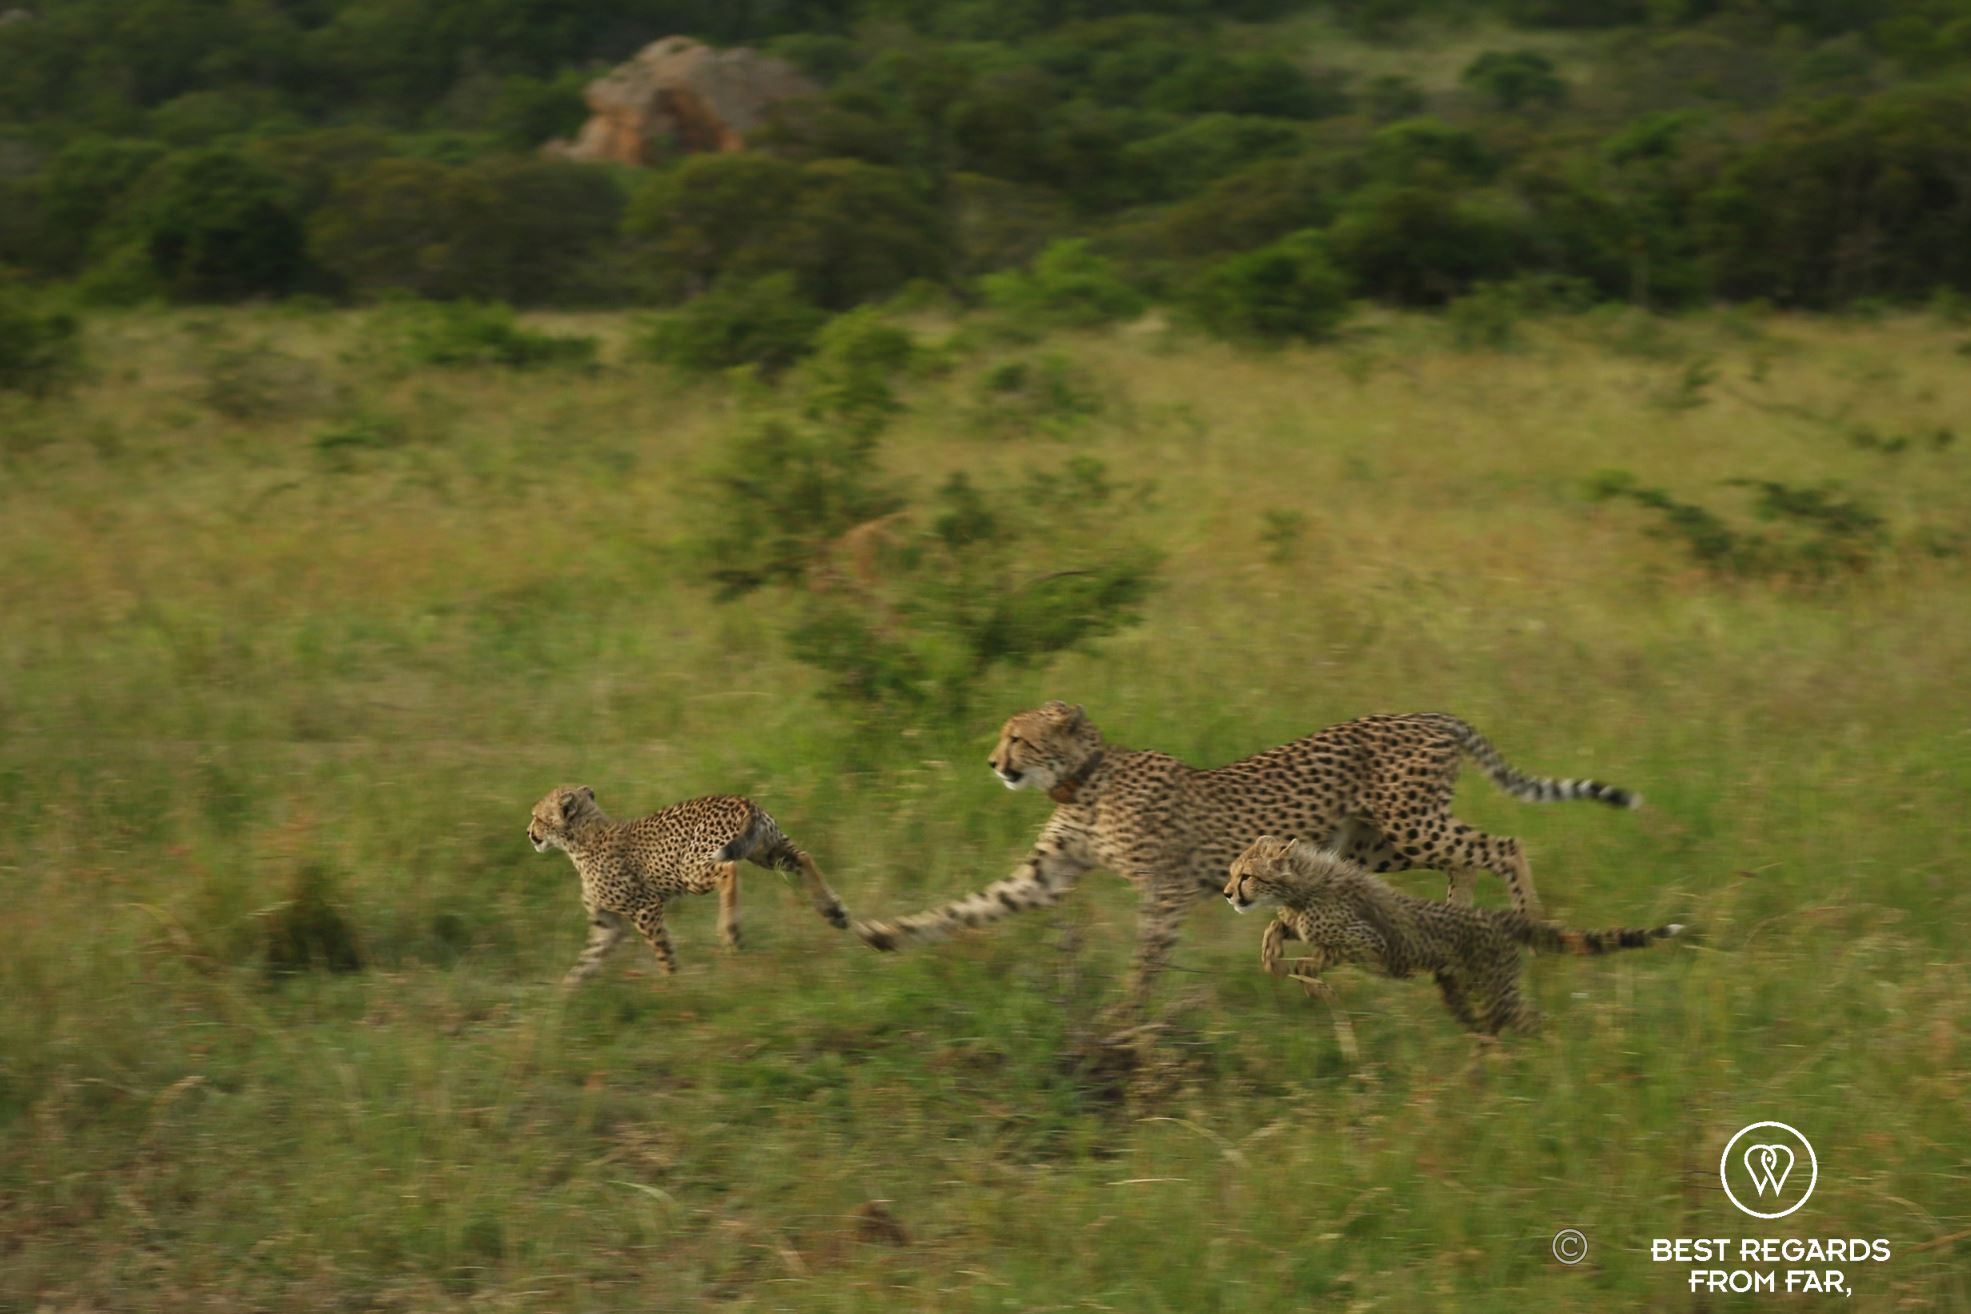 Two cheetah cubs playing with their mother, &Beyond Phinda Private Game Reserve, South Africa